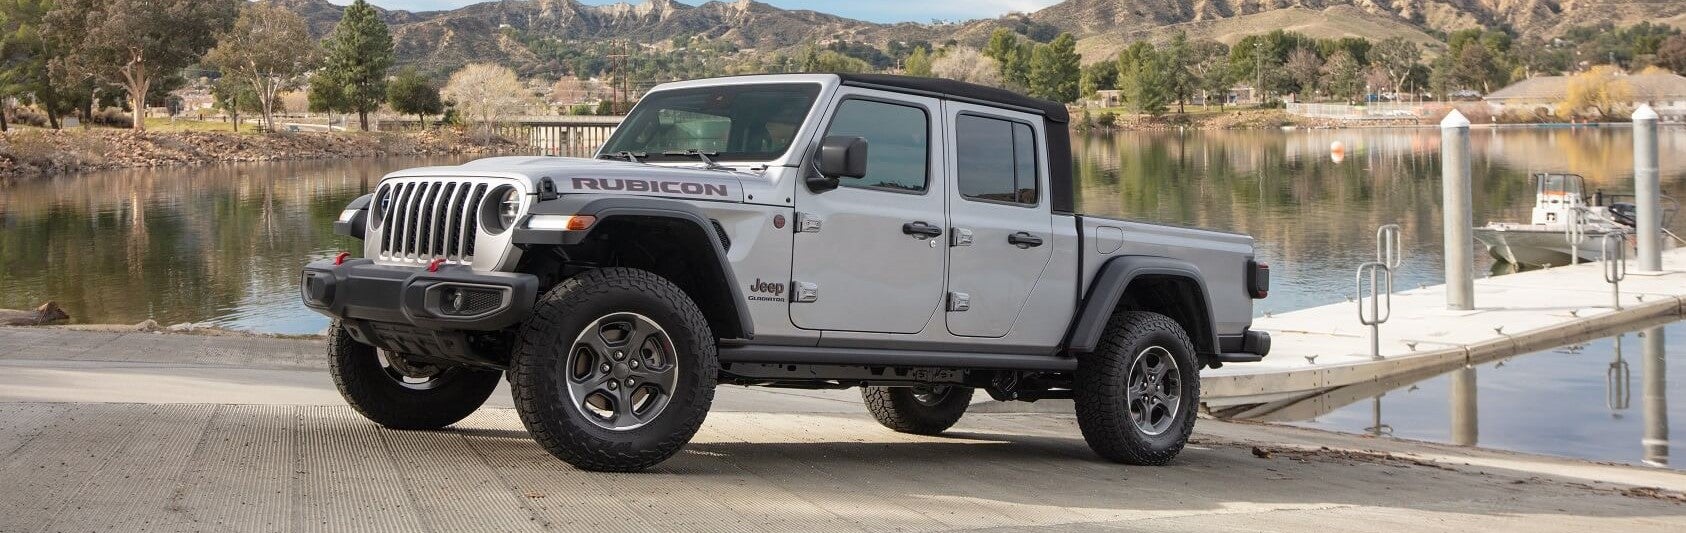 2021 Jeep Gladiator Review Woodhaven MI